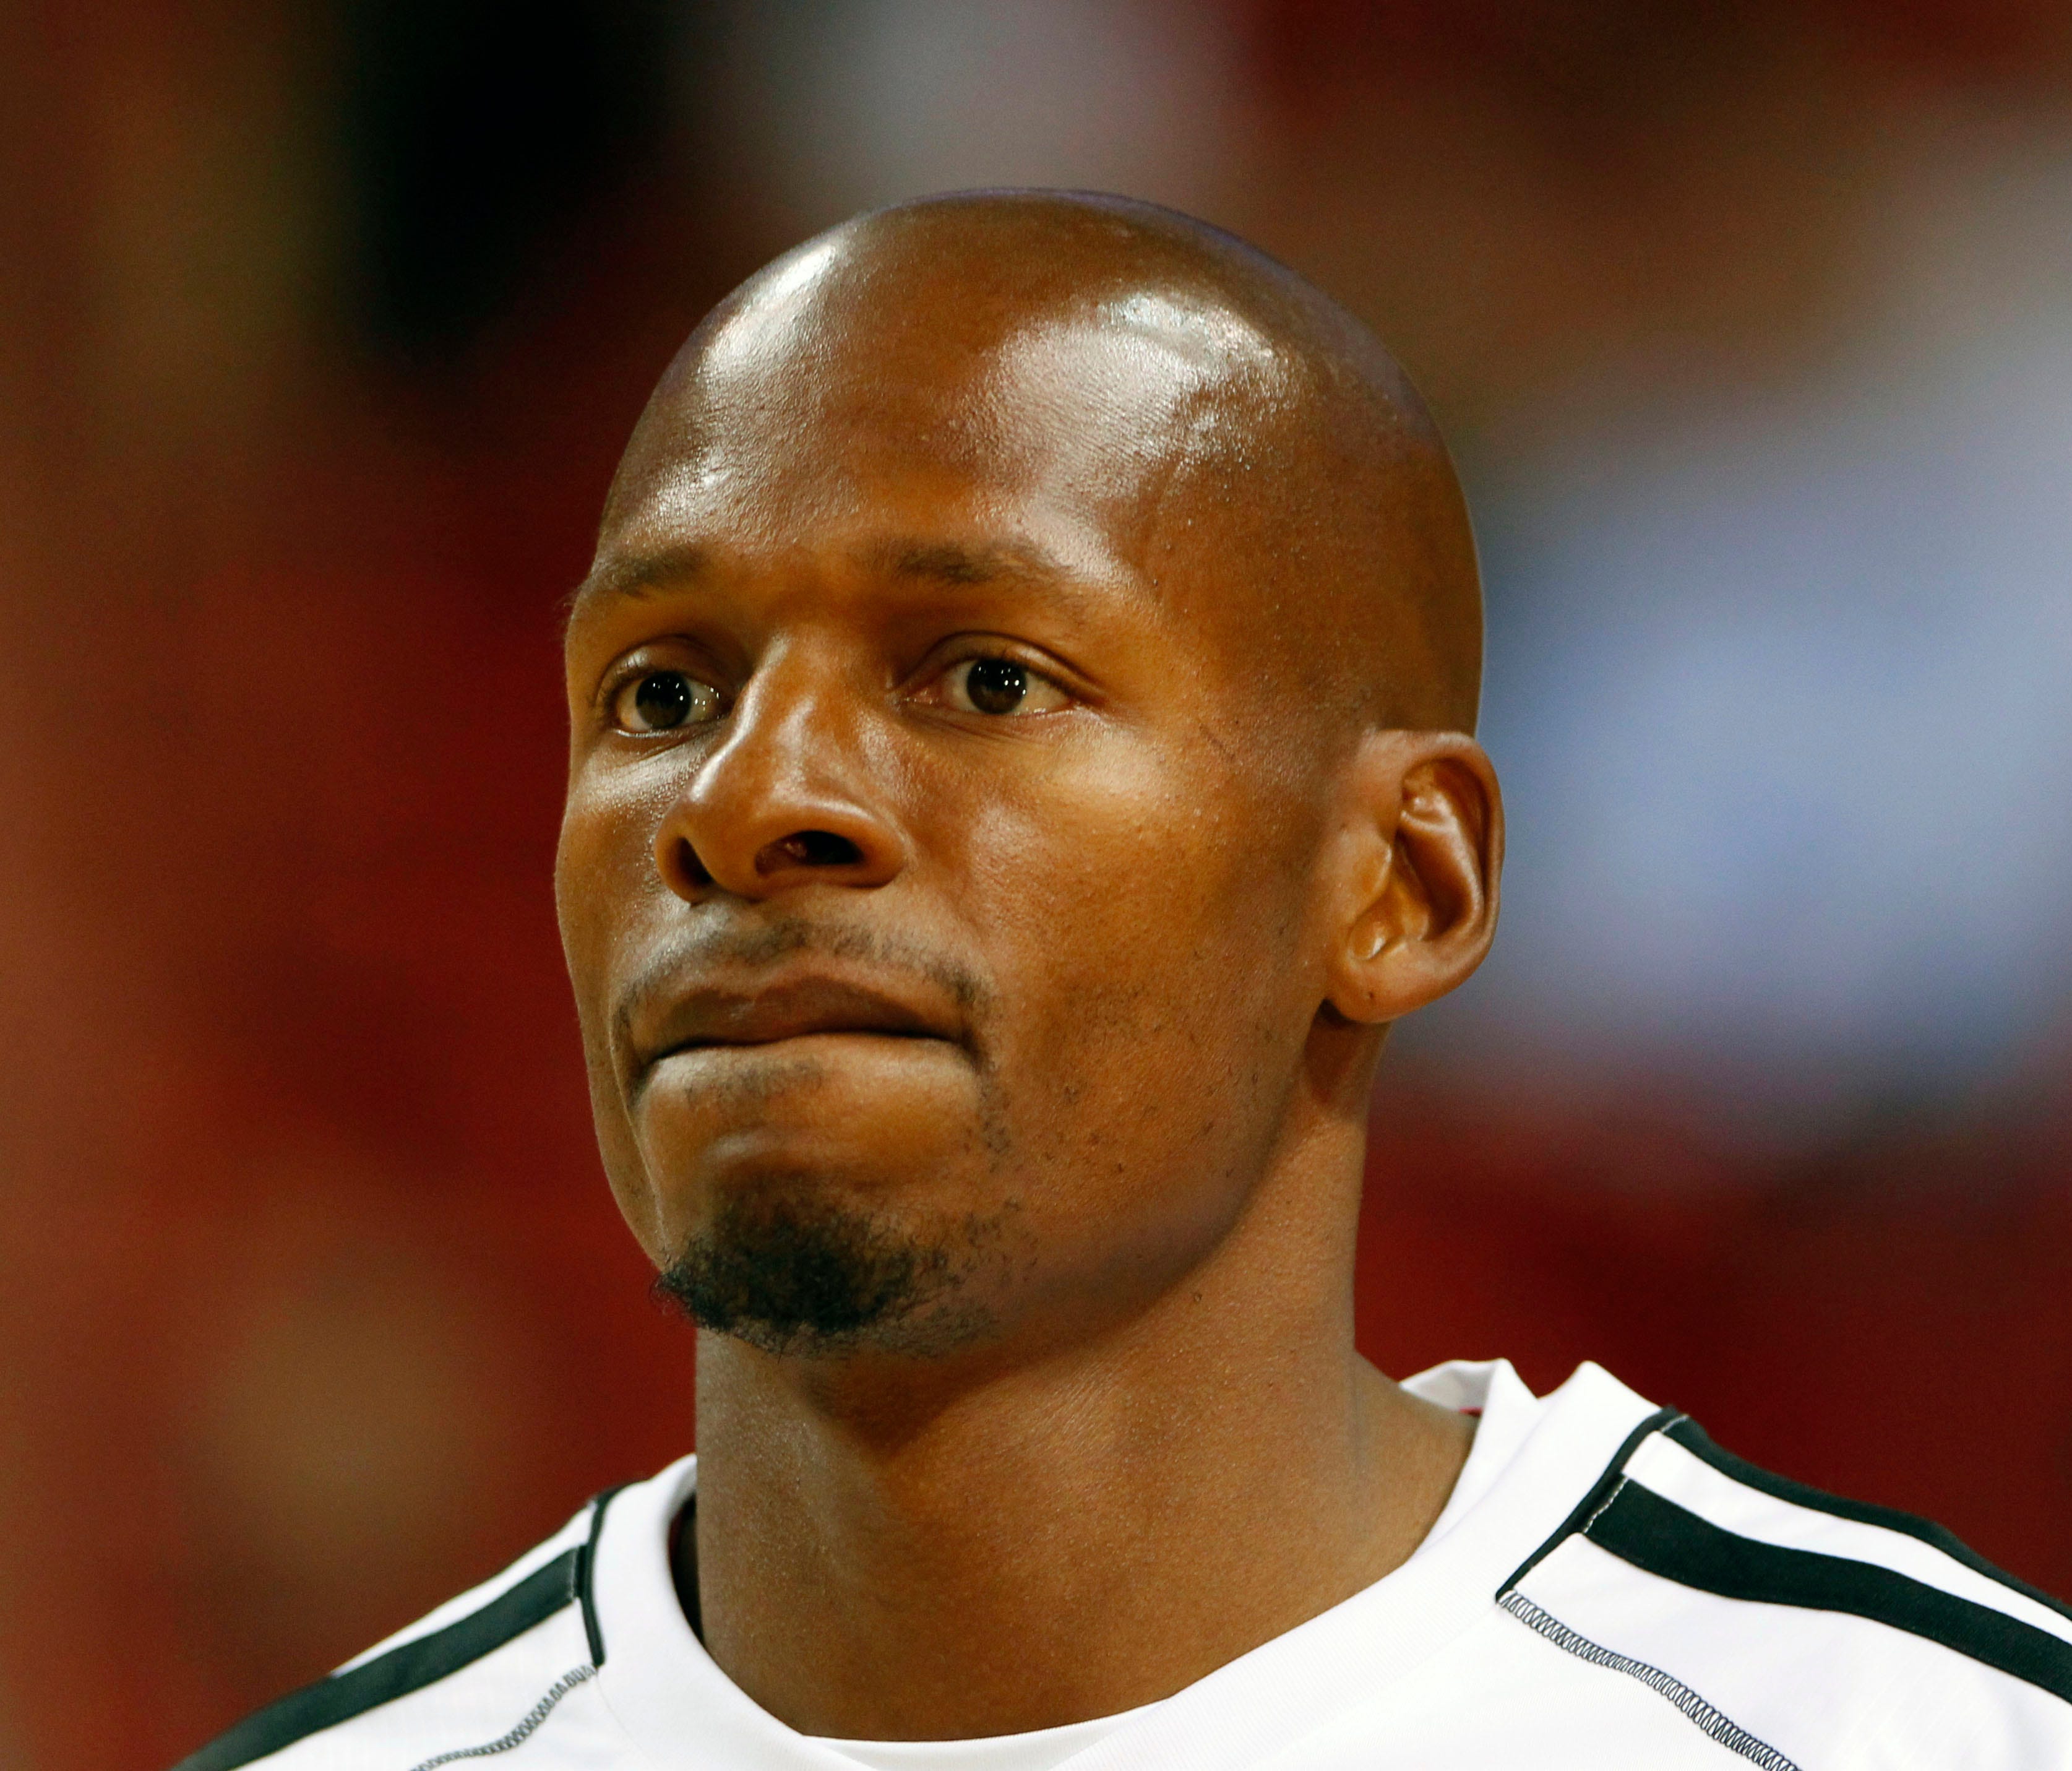 Miami Heat shooting guard Ray Allen before a game against the Atlanta Hawks at American Airlines Arena.